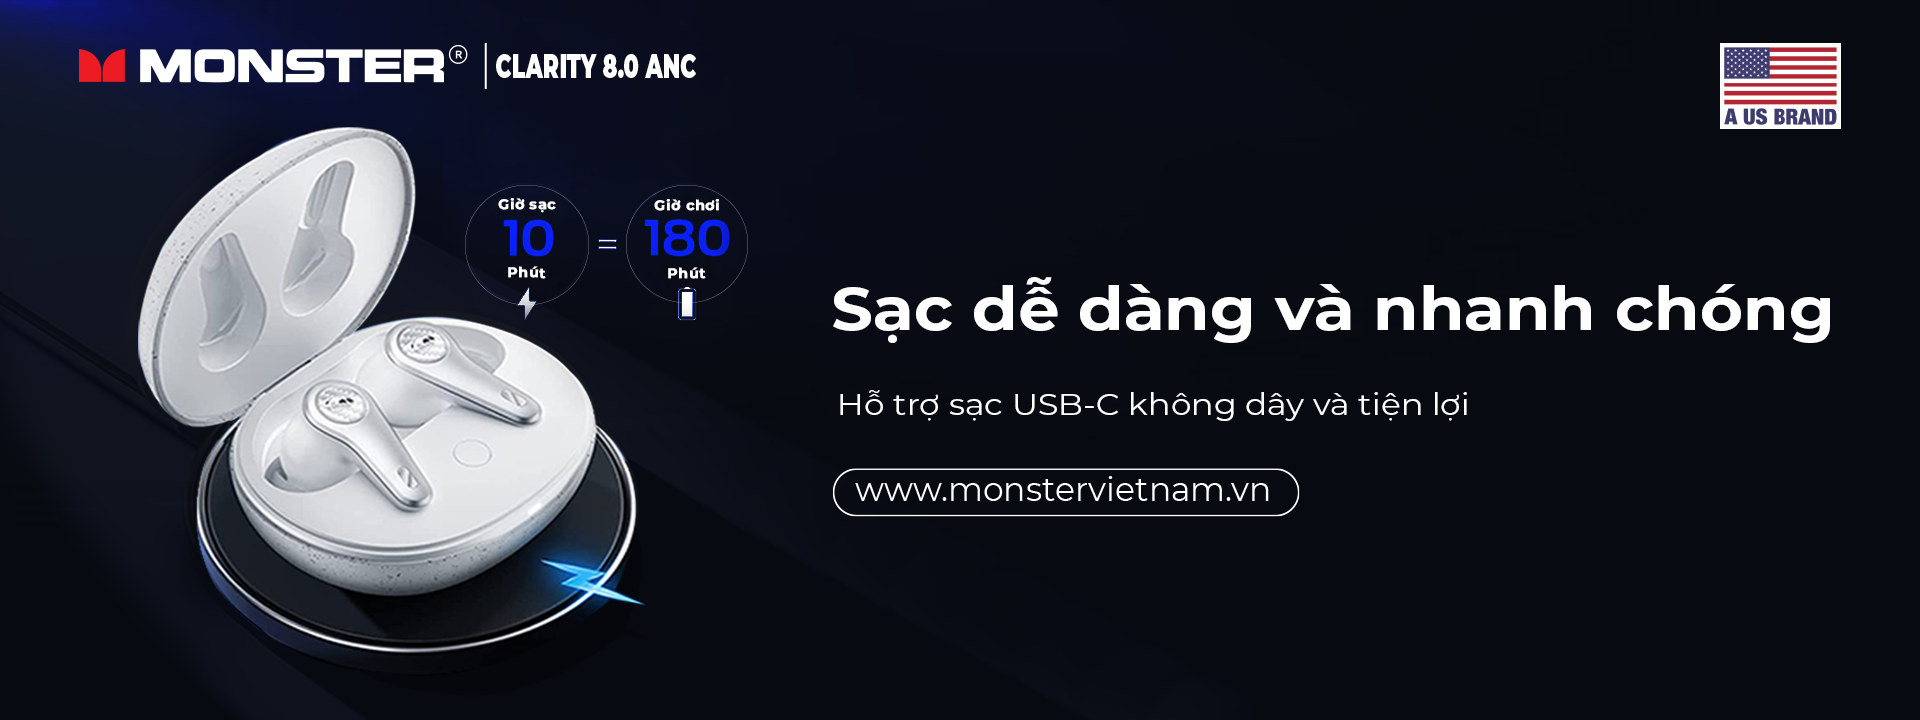 Tai nghe True Wireless Monster Clarity 8.0 ANC | Anh Duy Audio